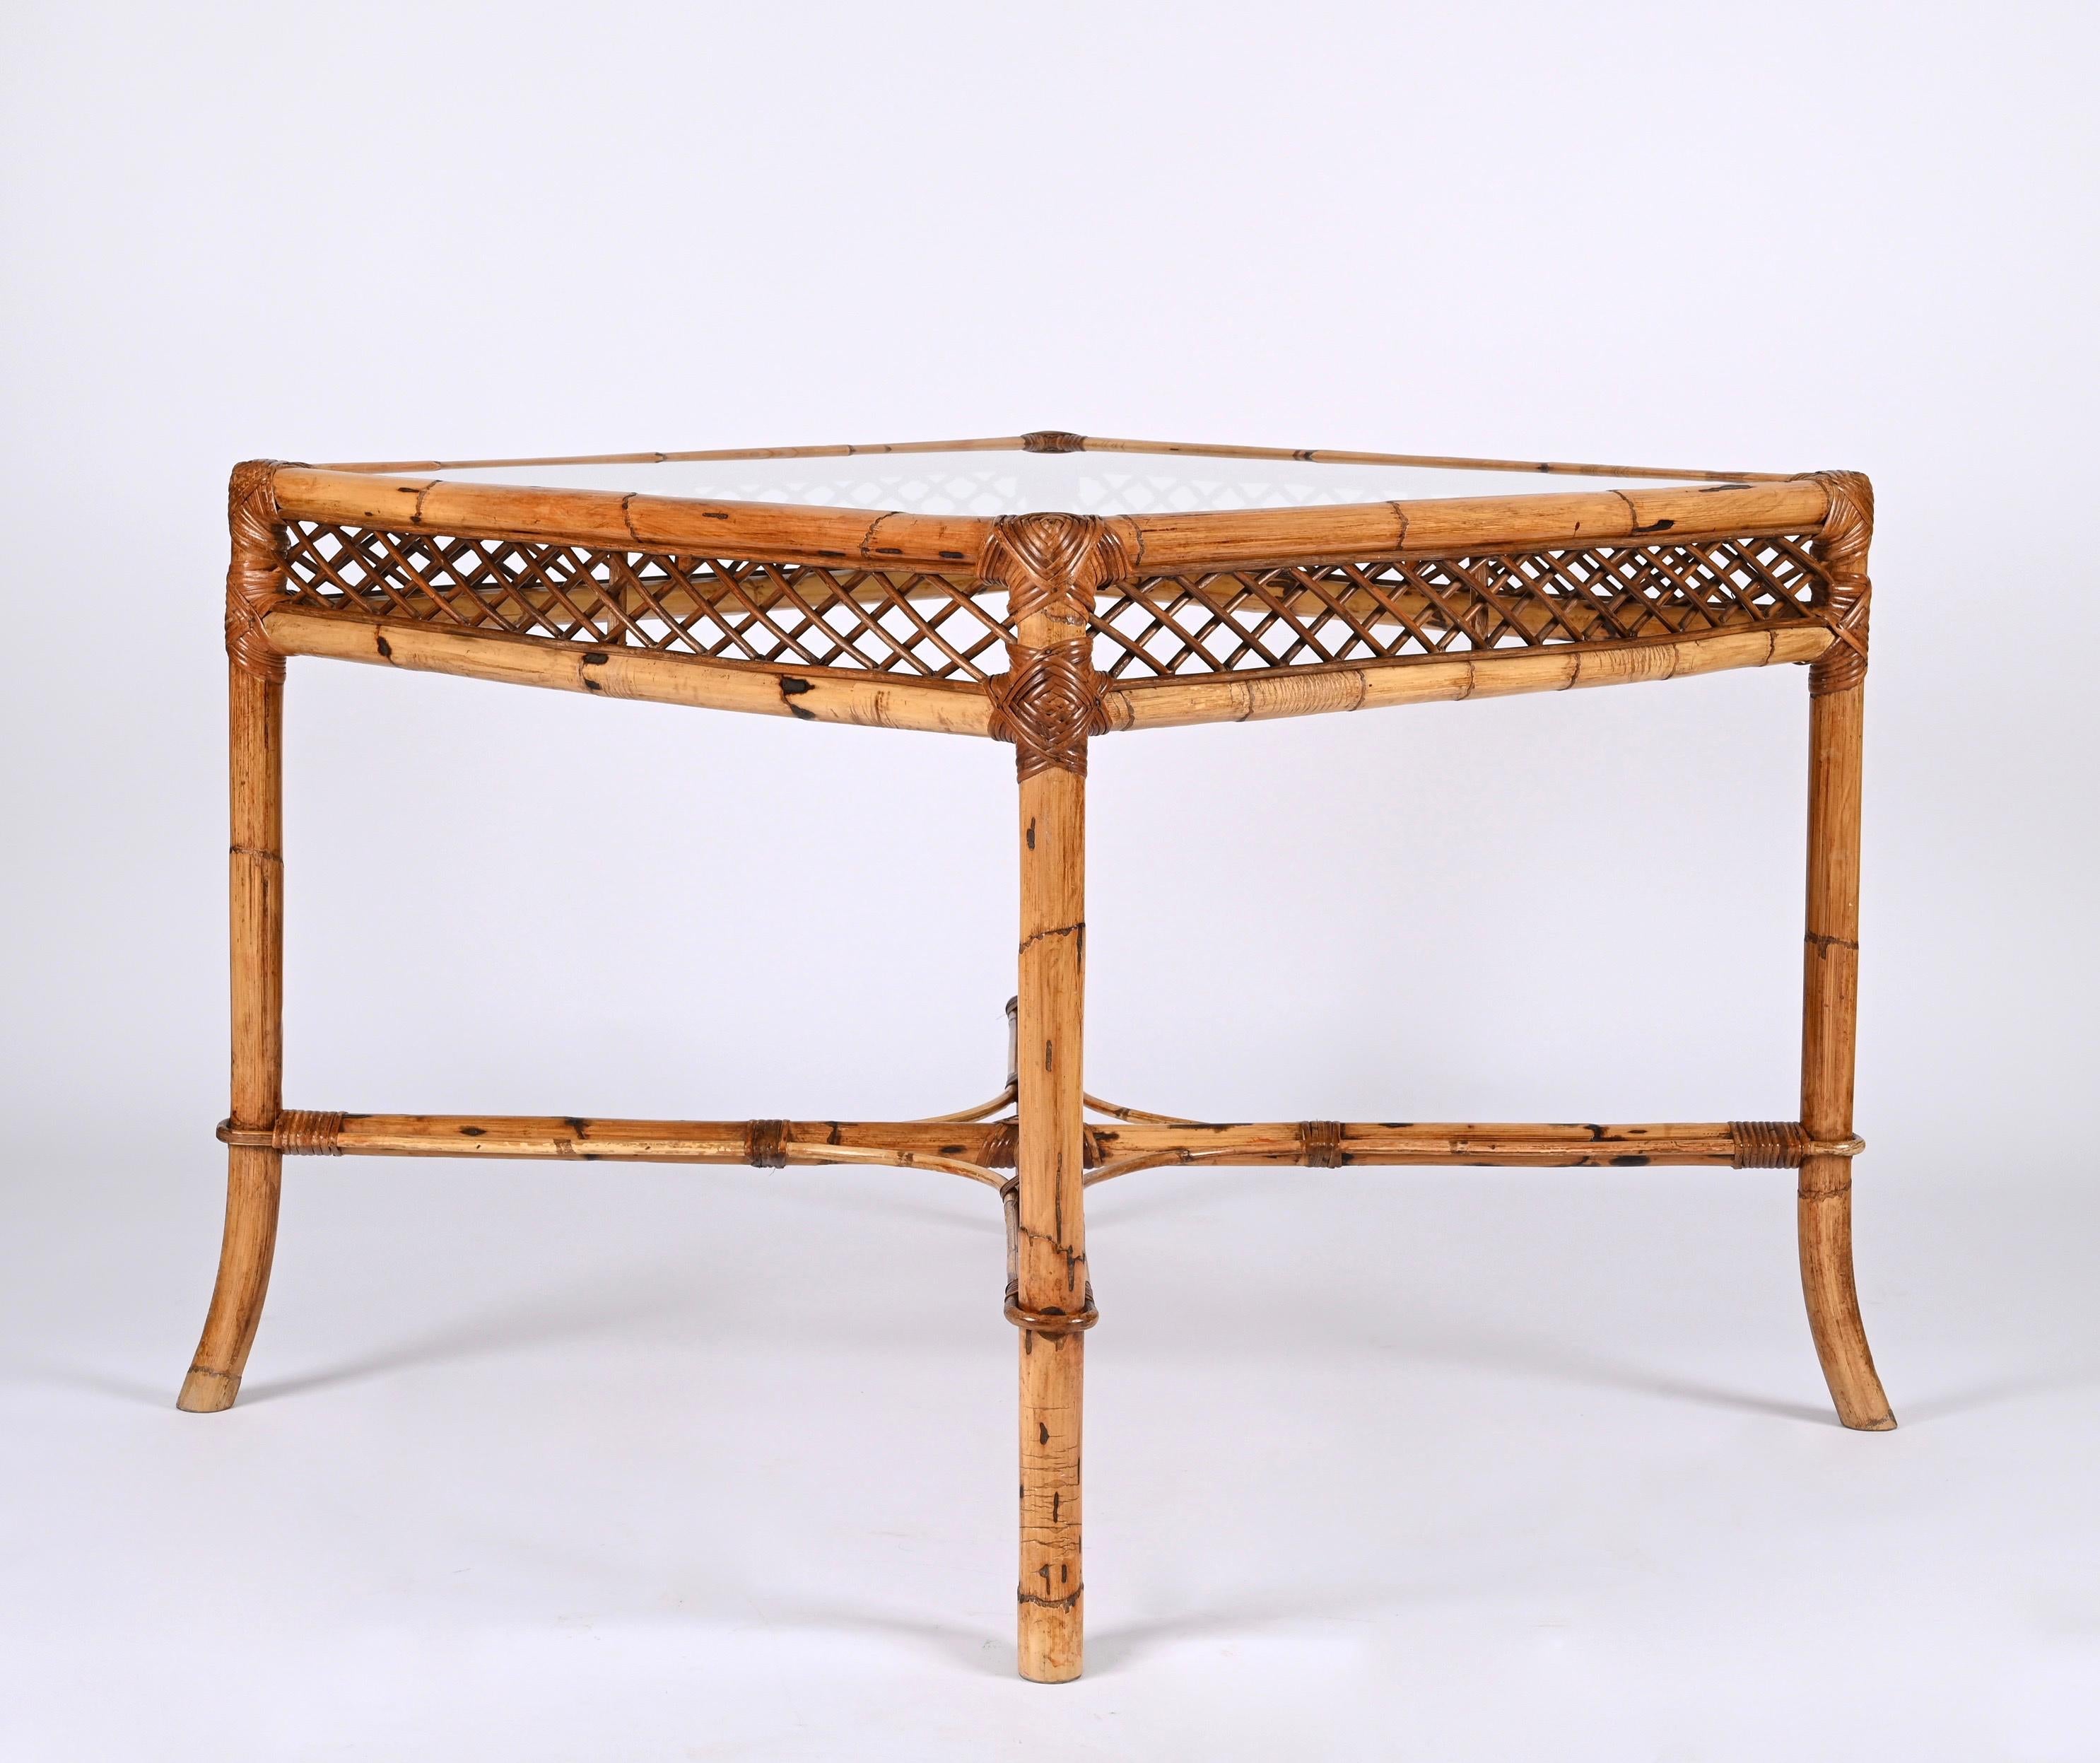 Midcentury Vivai del Sud Squared Bamboo Italian Dining Table with Glass Top 1960 For Sale 3